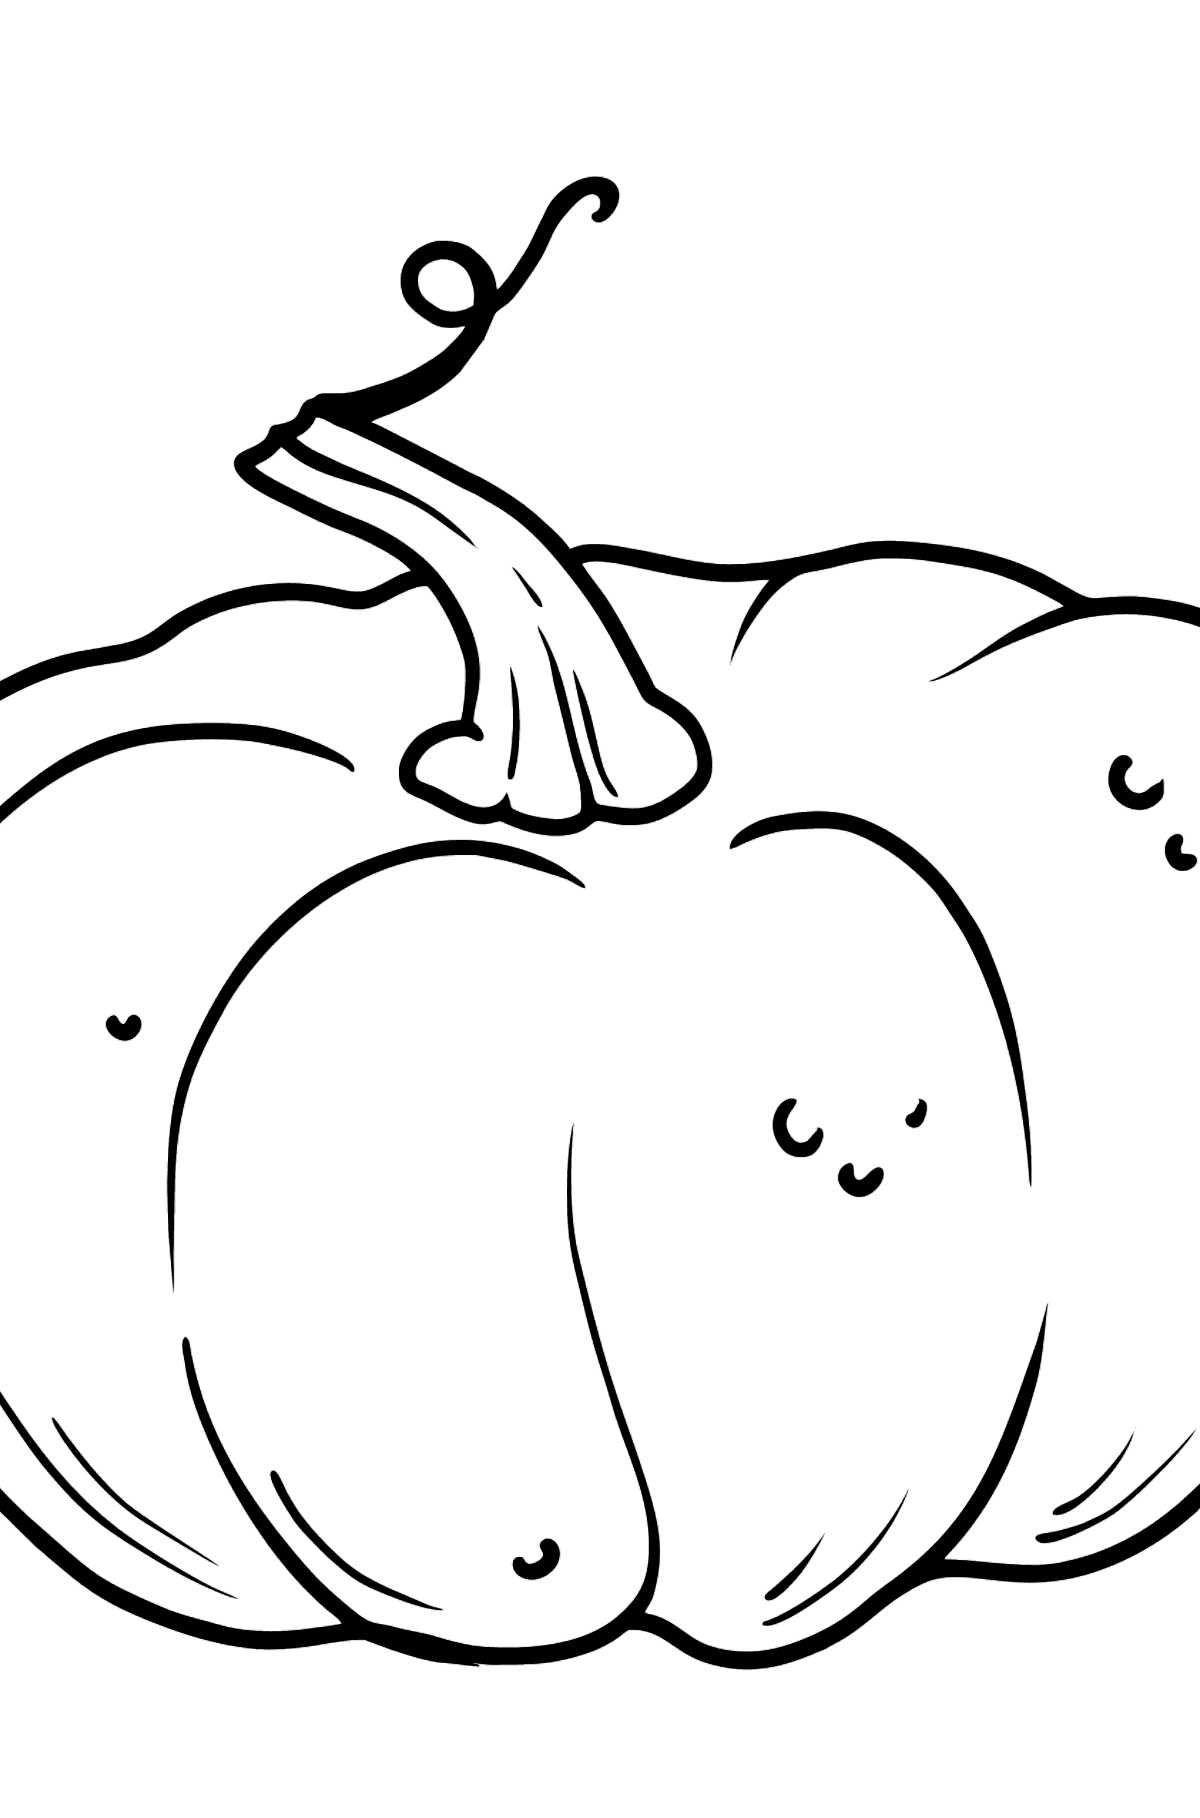 Pumpkin coloring page - Coloring Pages for Kids